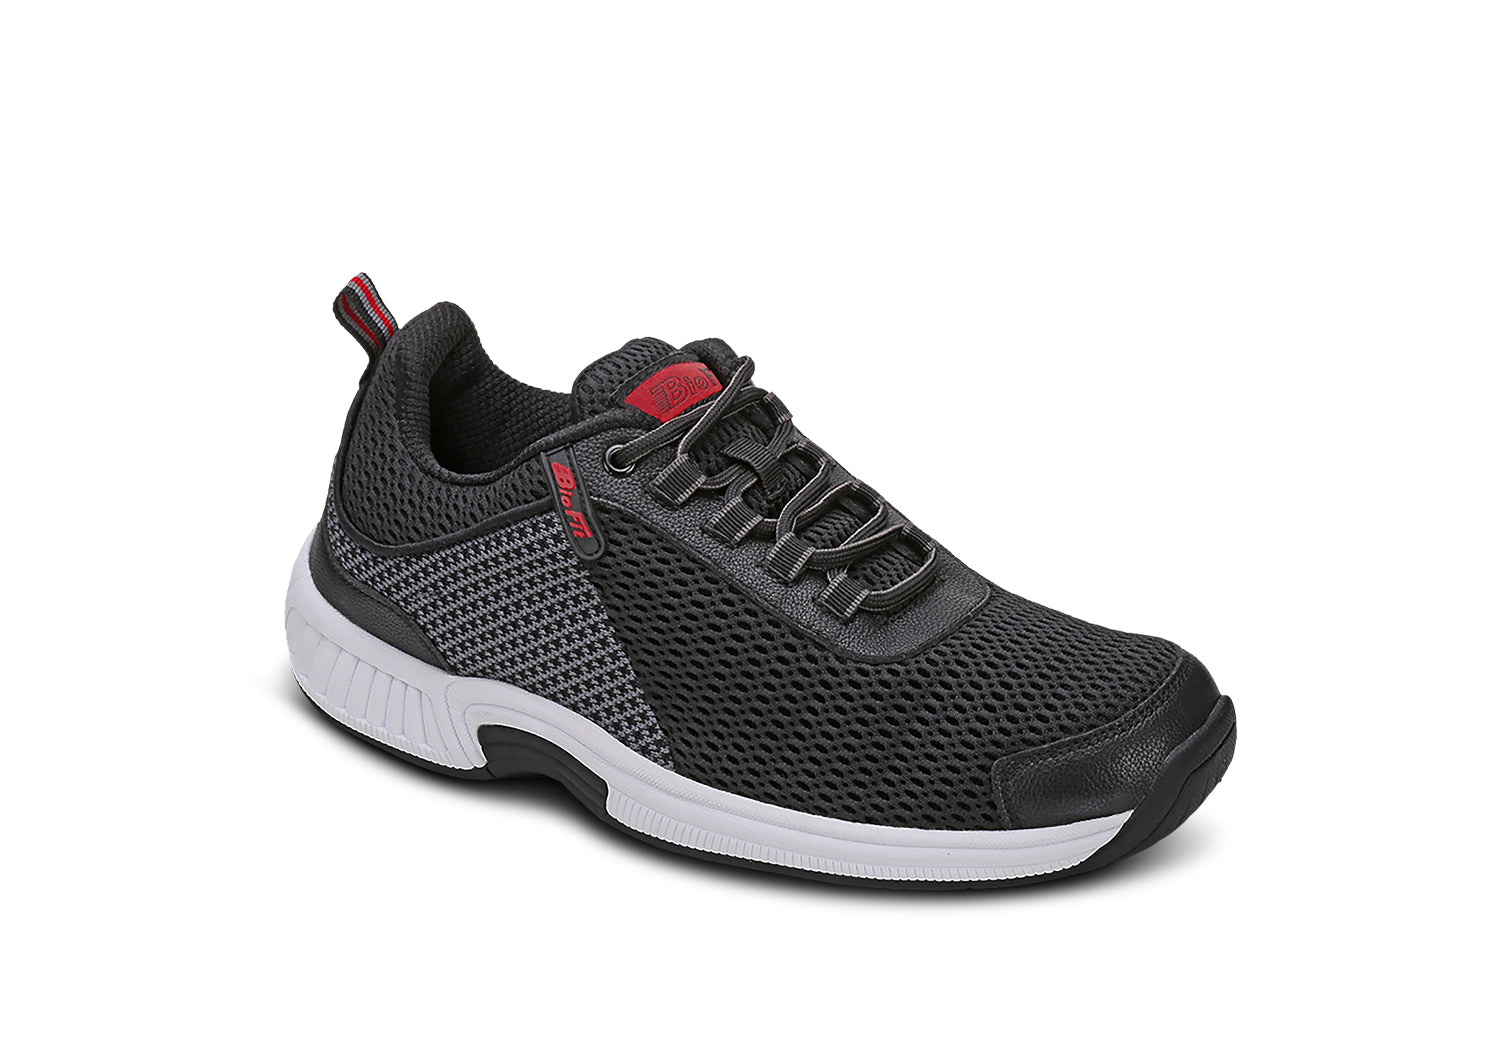 Men's Max Water Shoes - All in Motion Black 11 1 ct